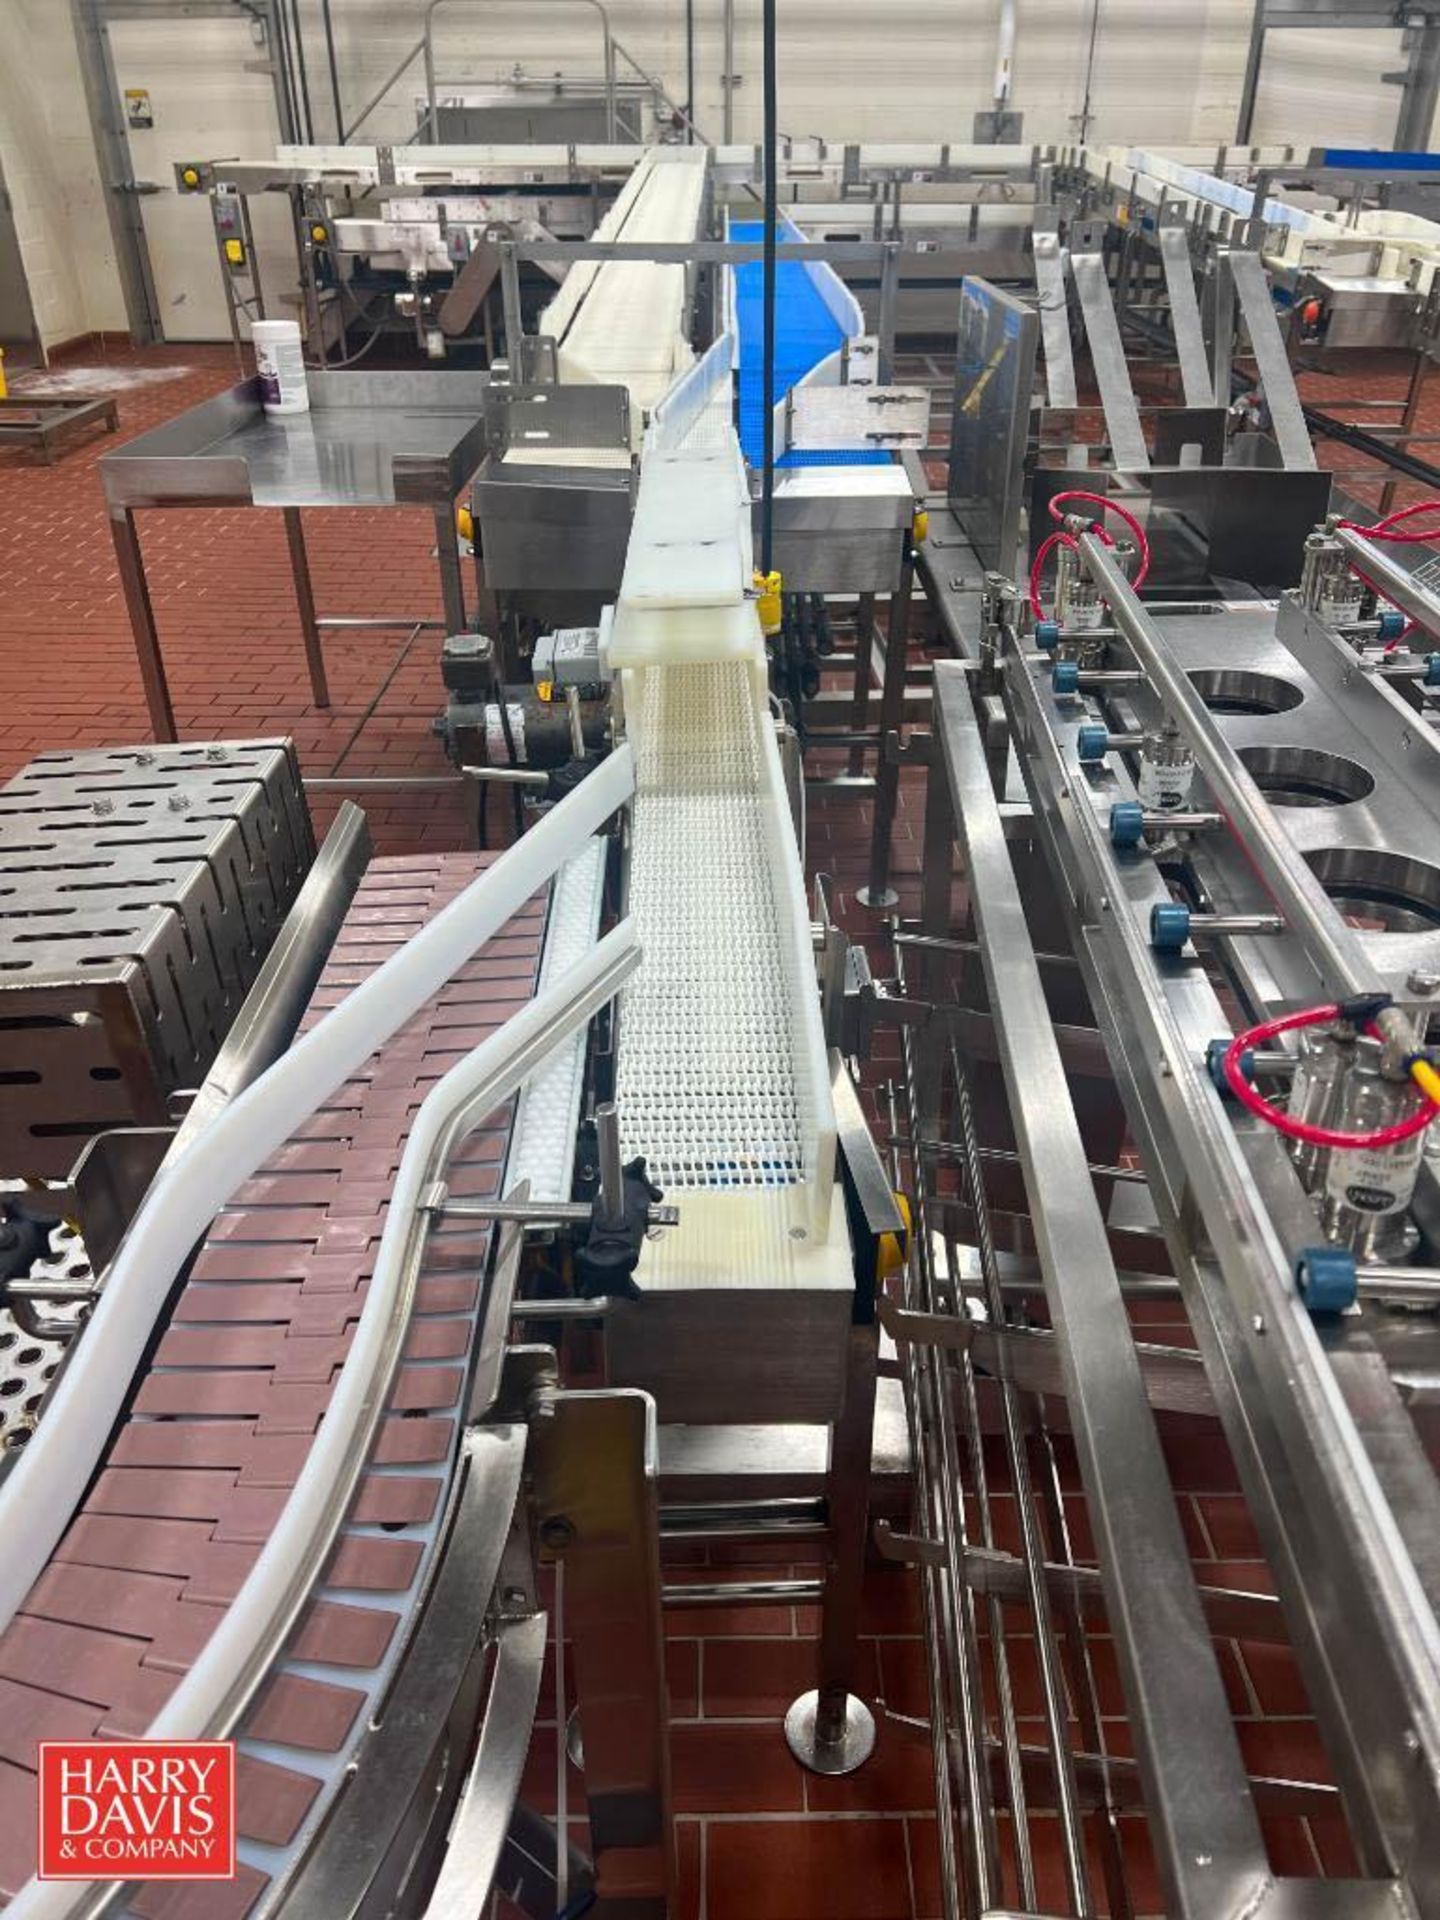 S/S Framed Dual-Lane Inclined/Declined Power Conveyor with Plastic Chain - Image 2 of 2